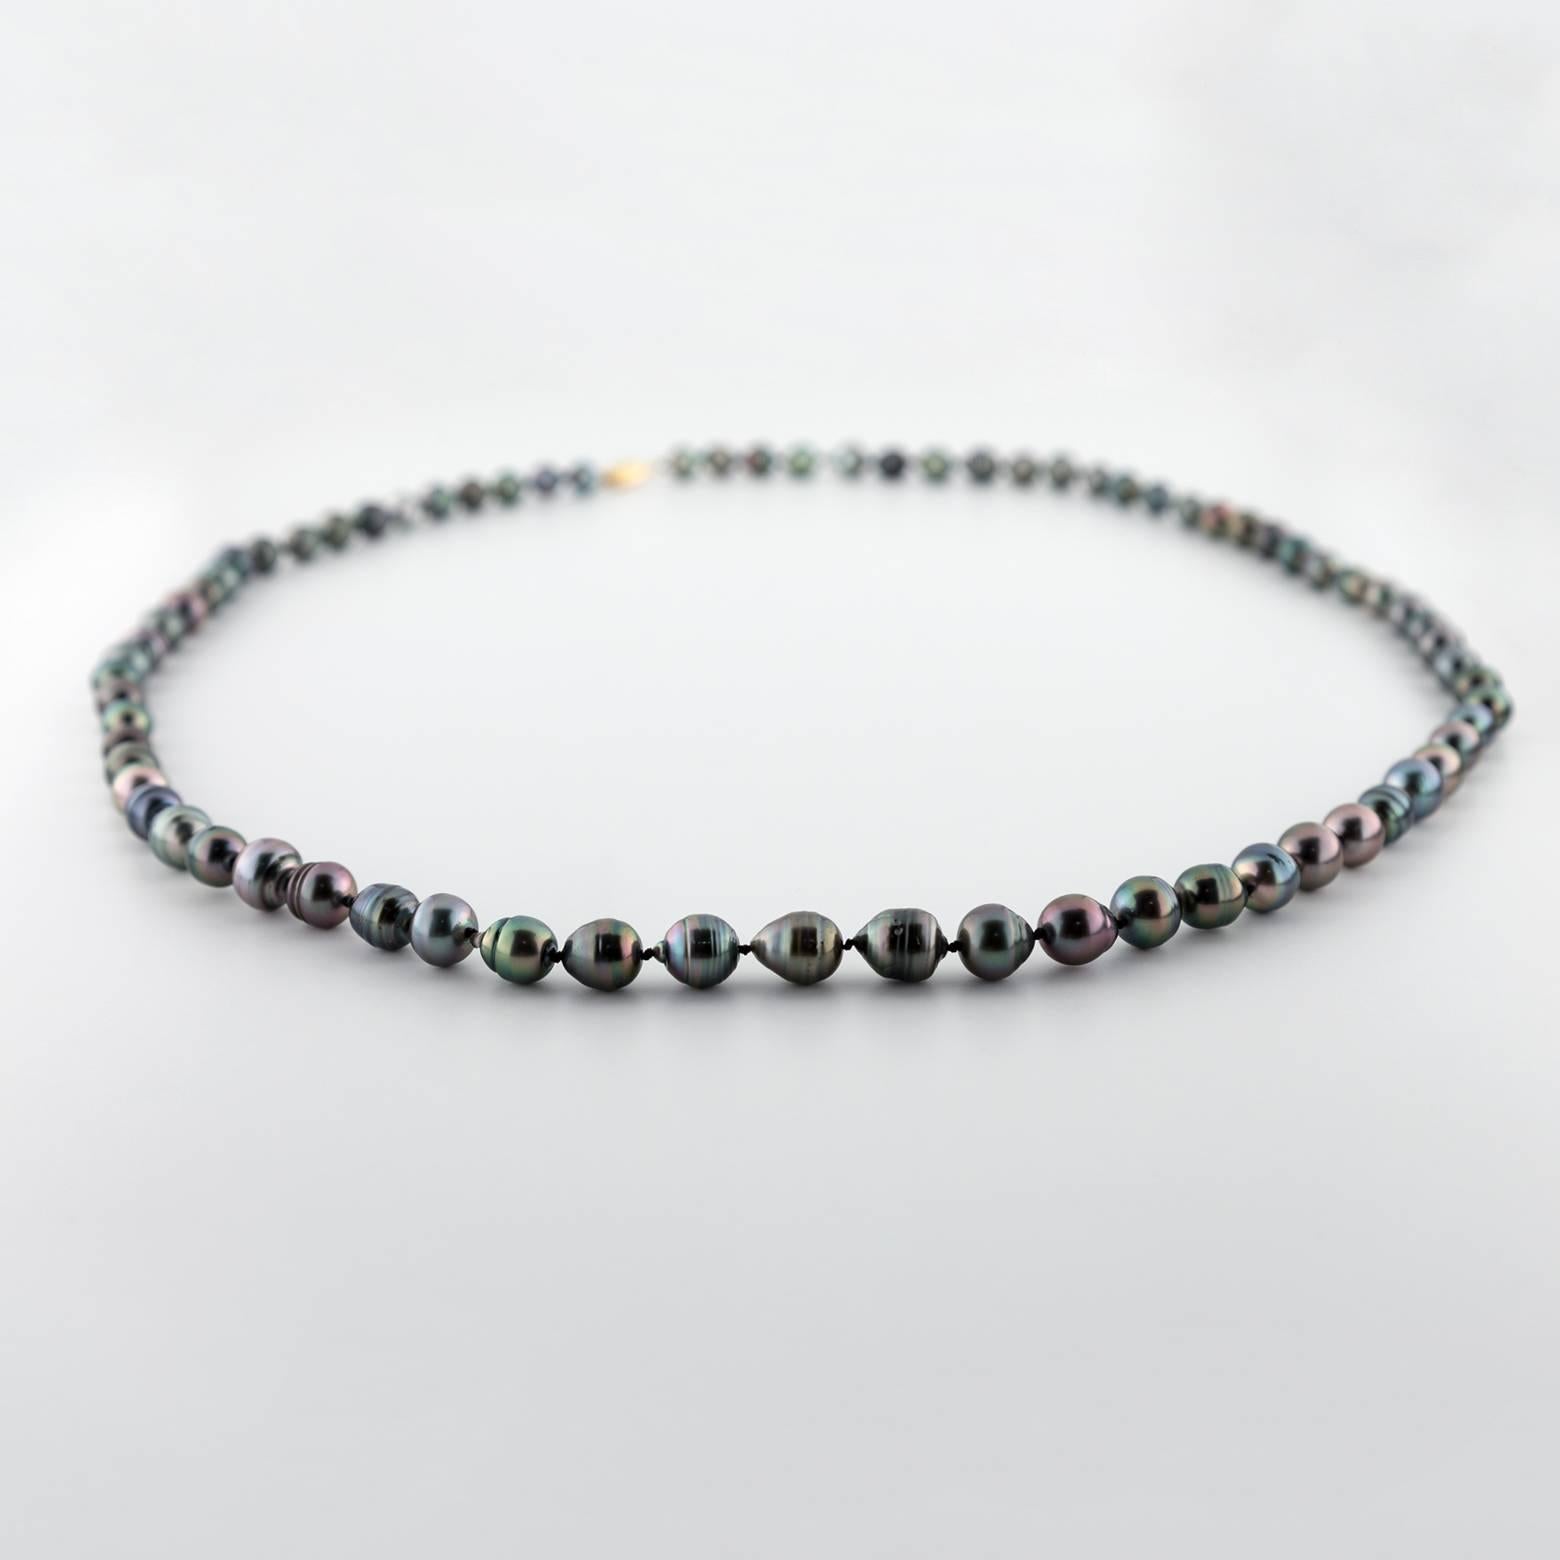 This a 33 inch long South Sea Black Tahitian Pearl necklace that you could easily wrap around twice for a stunning and alternating look. These pearls are gorgeous! Each one is unique and slightly reflects whatever color you are wearing. A perfect